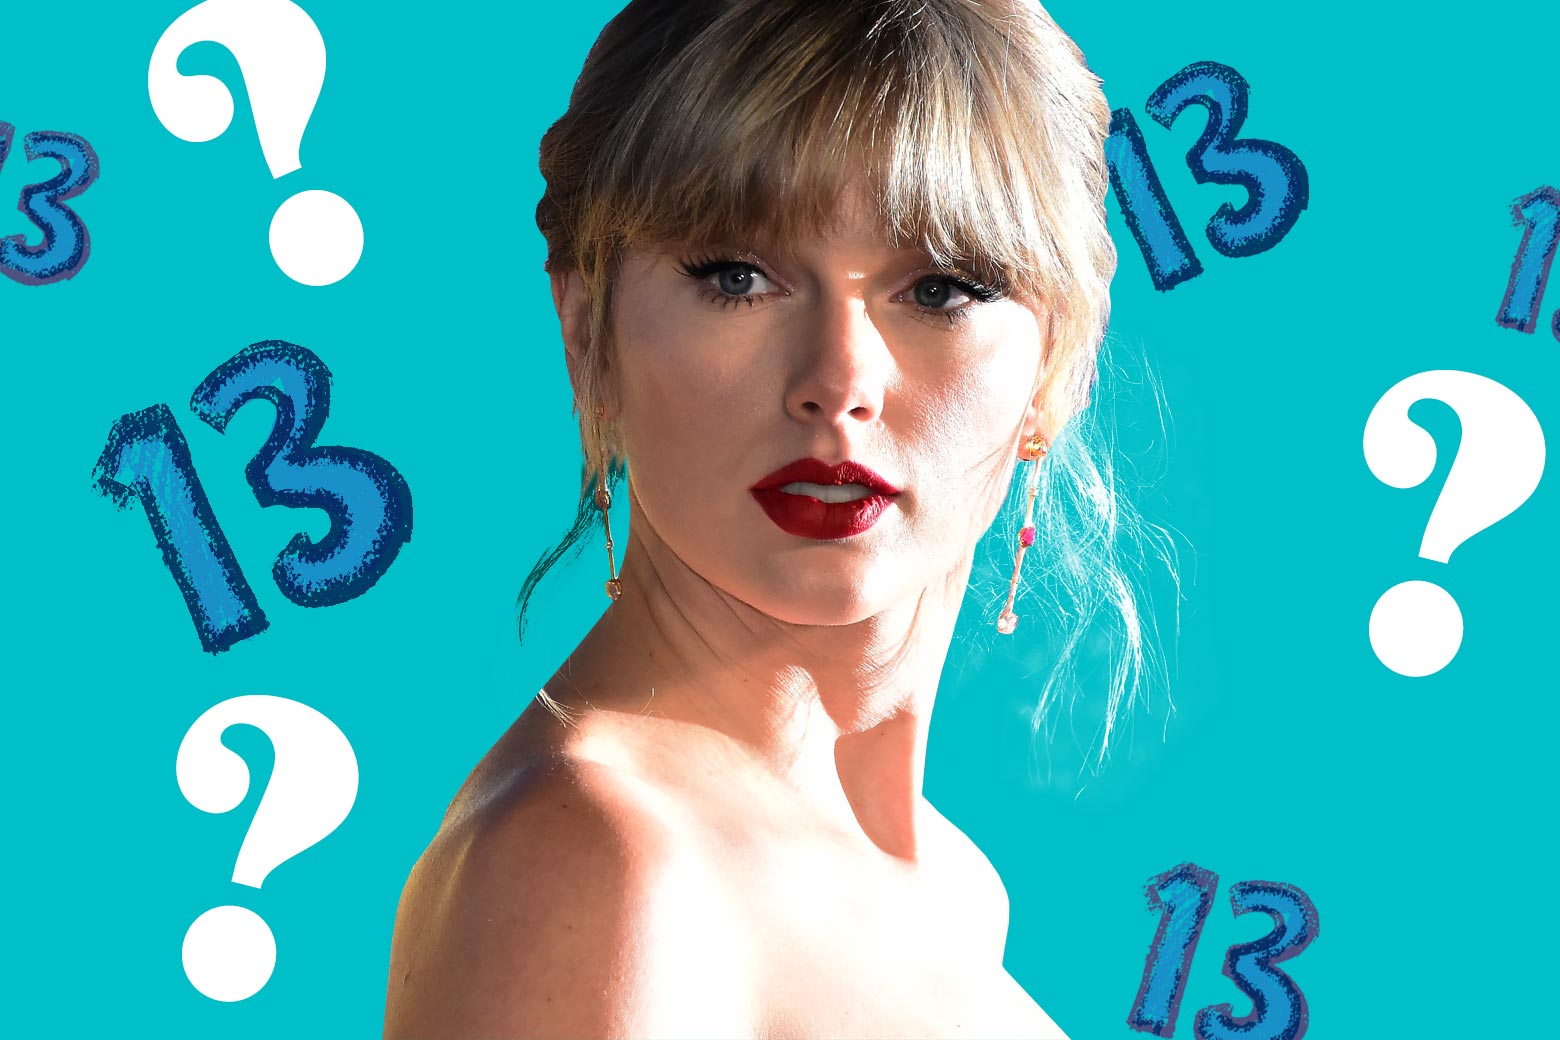 Taylor Swift against a blue background dotted with question marks and 13s.